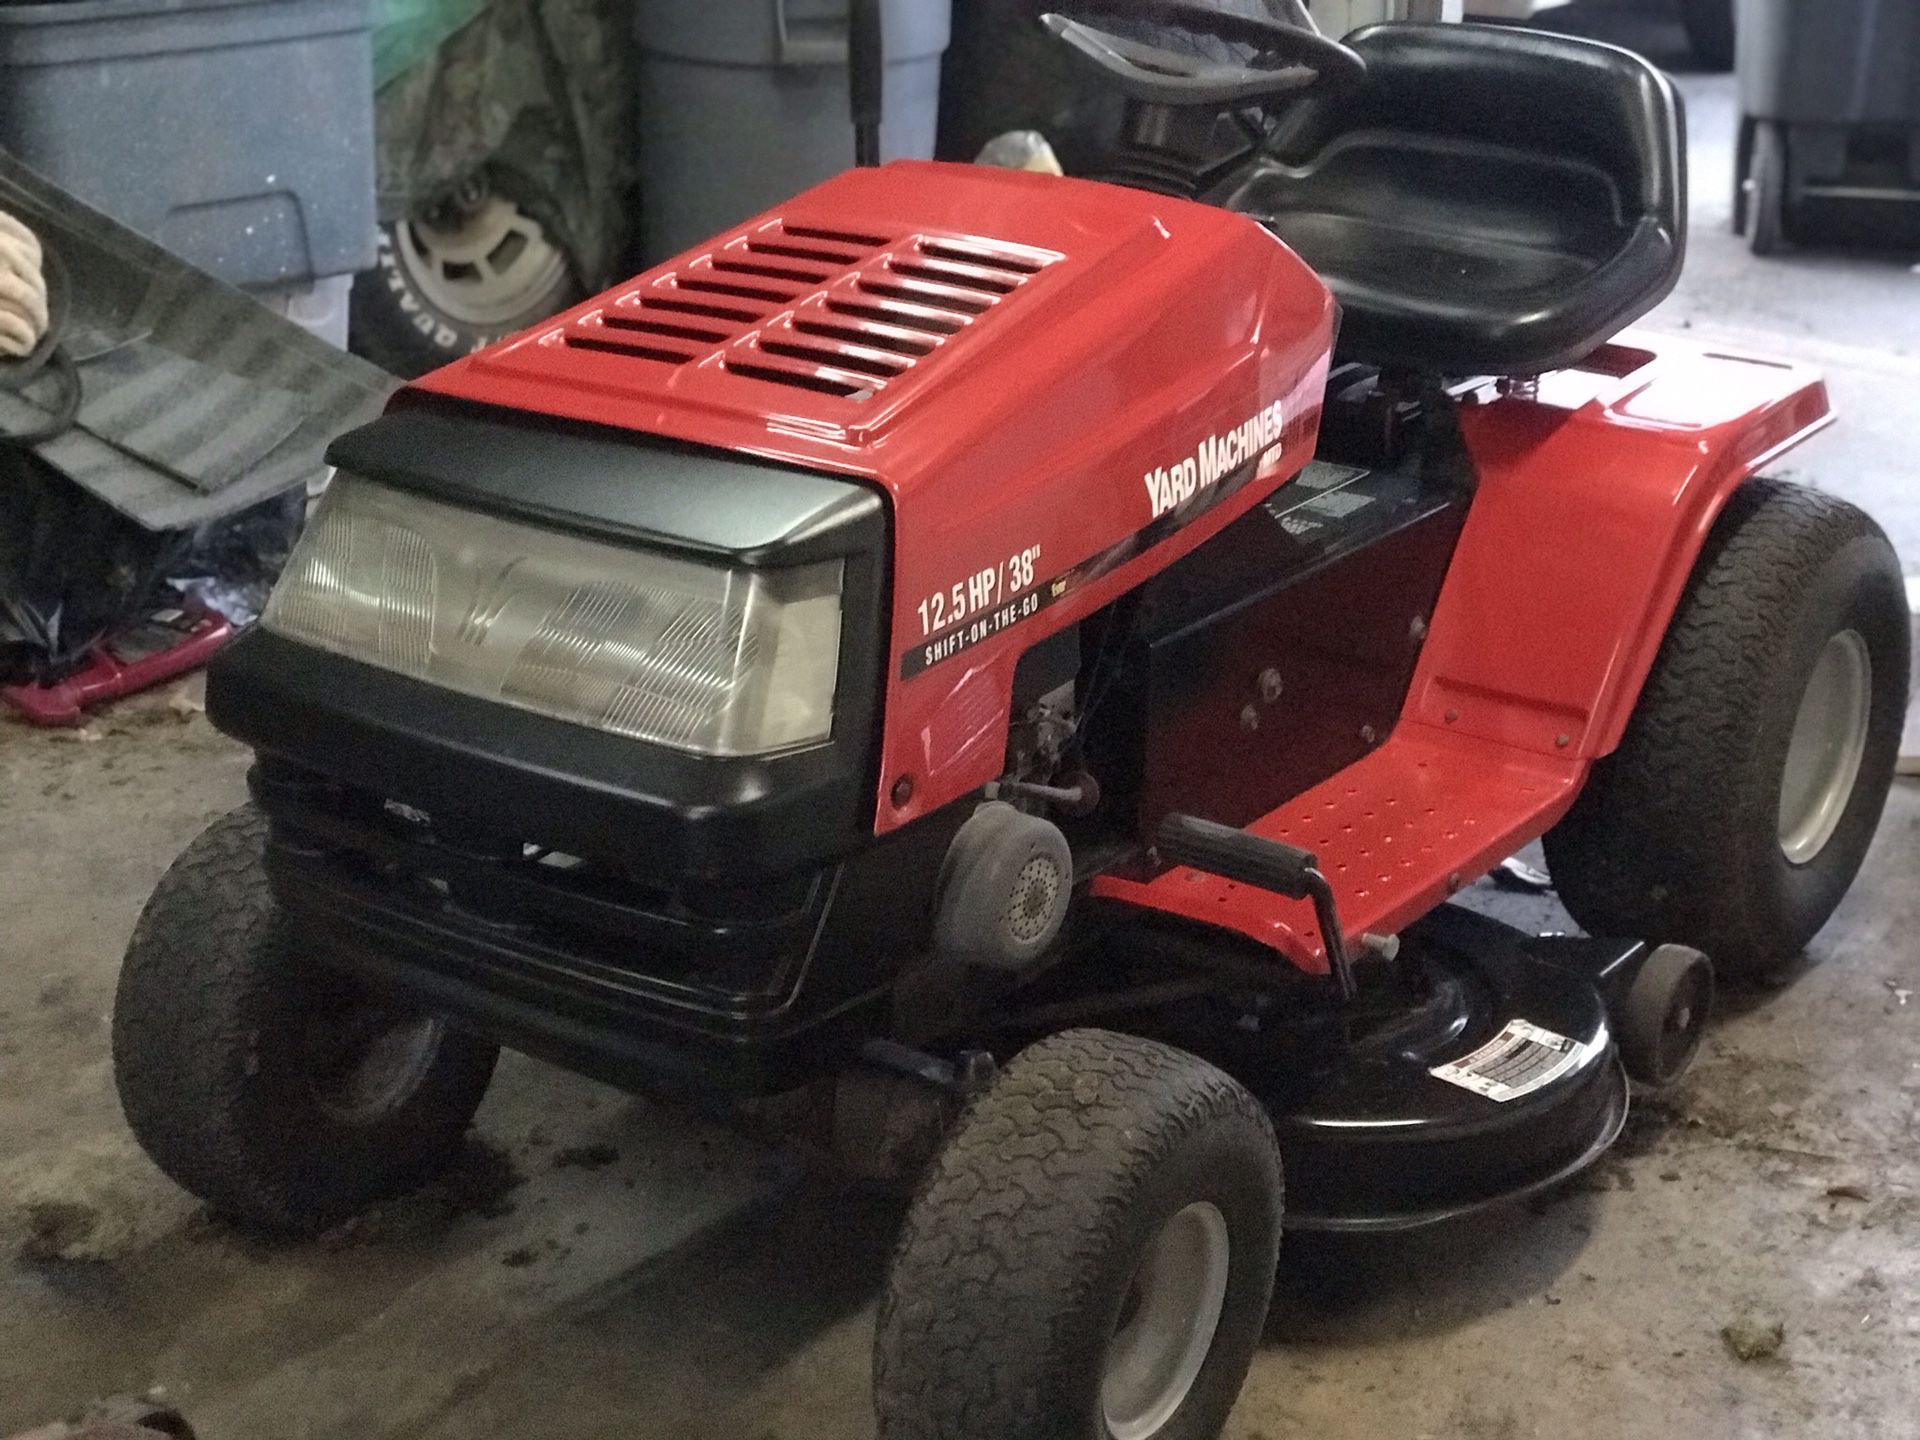 Anyone looking for a lawn more.... yard machines MTD 38”